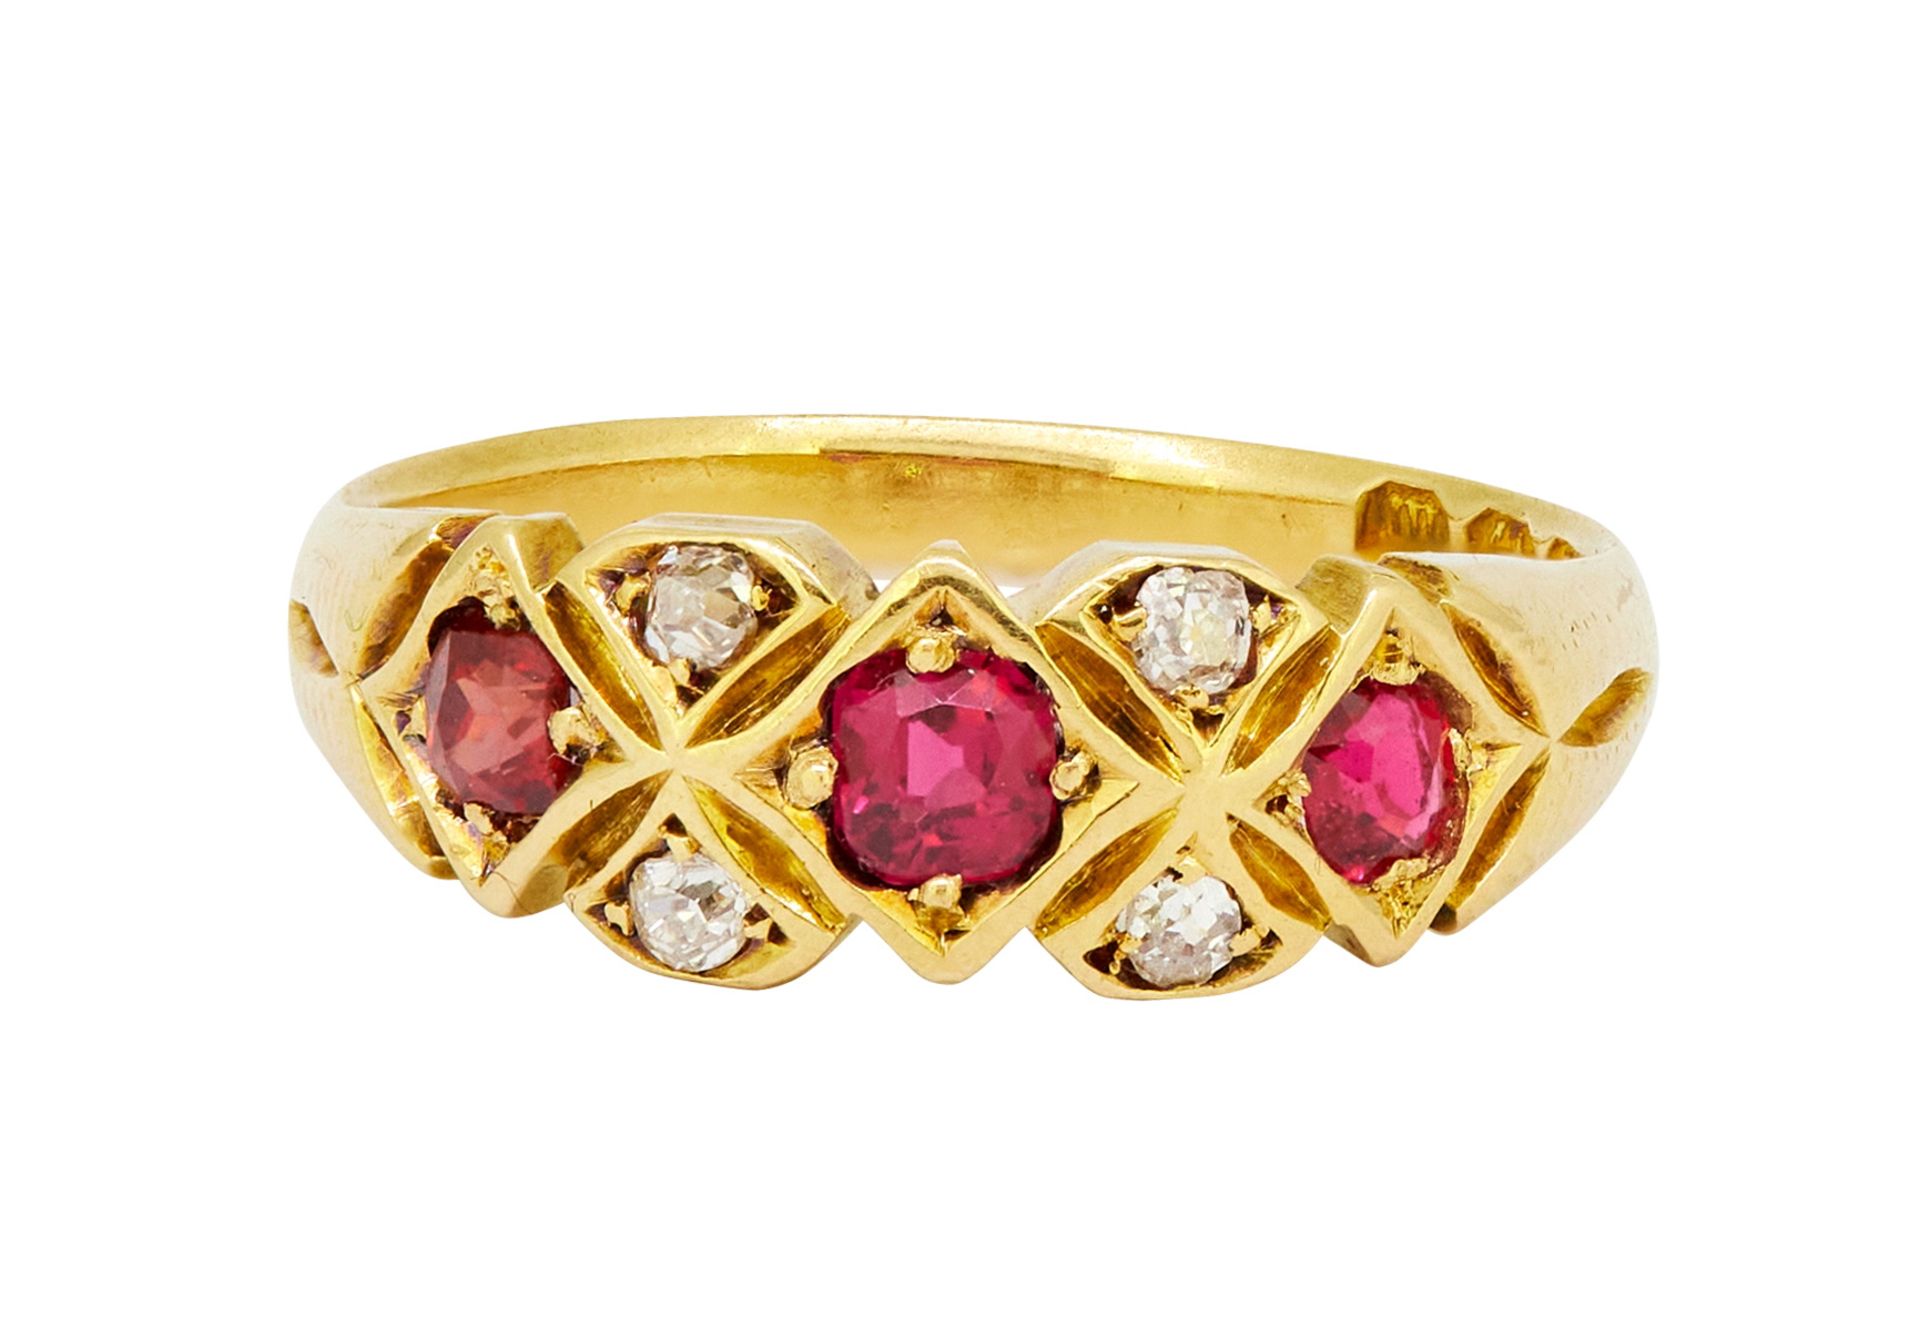 ANTIQUE RUBY AND DIAMOND RING